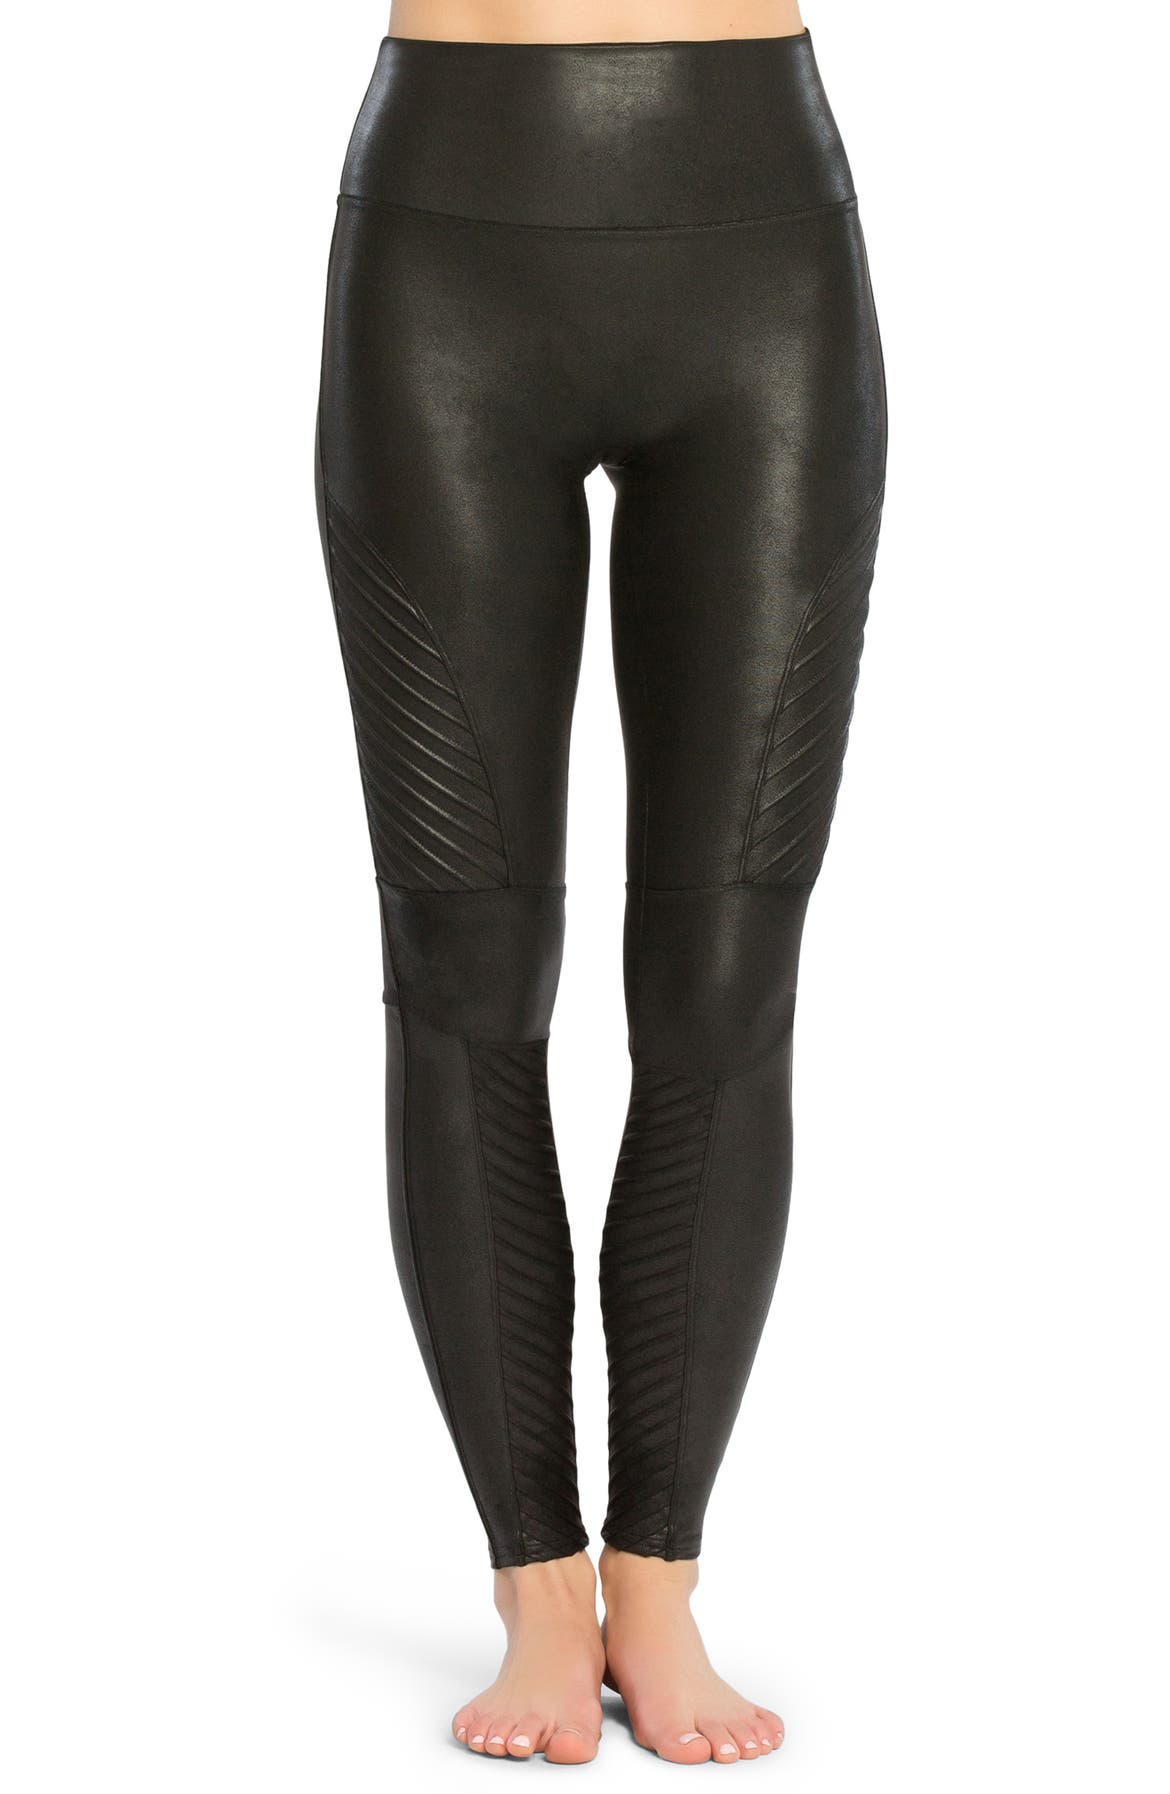 The Best Affordable Alternatives To The Spanx Leather Leggings